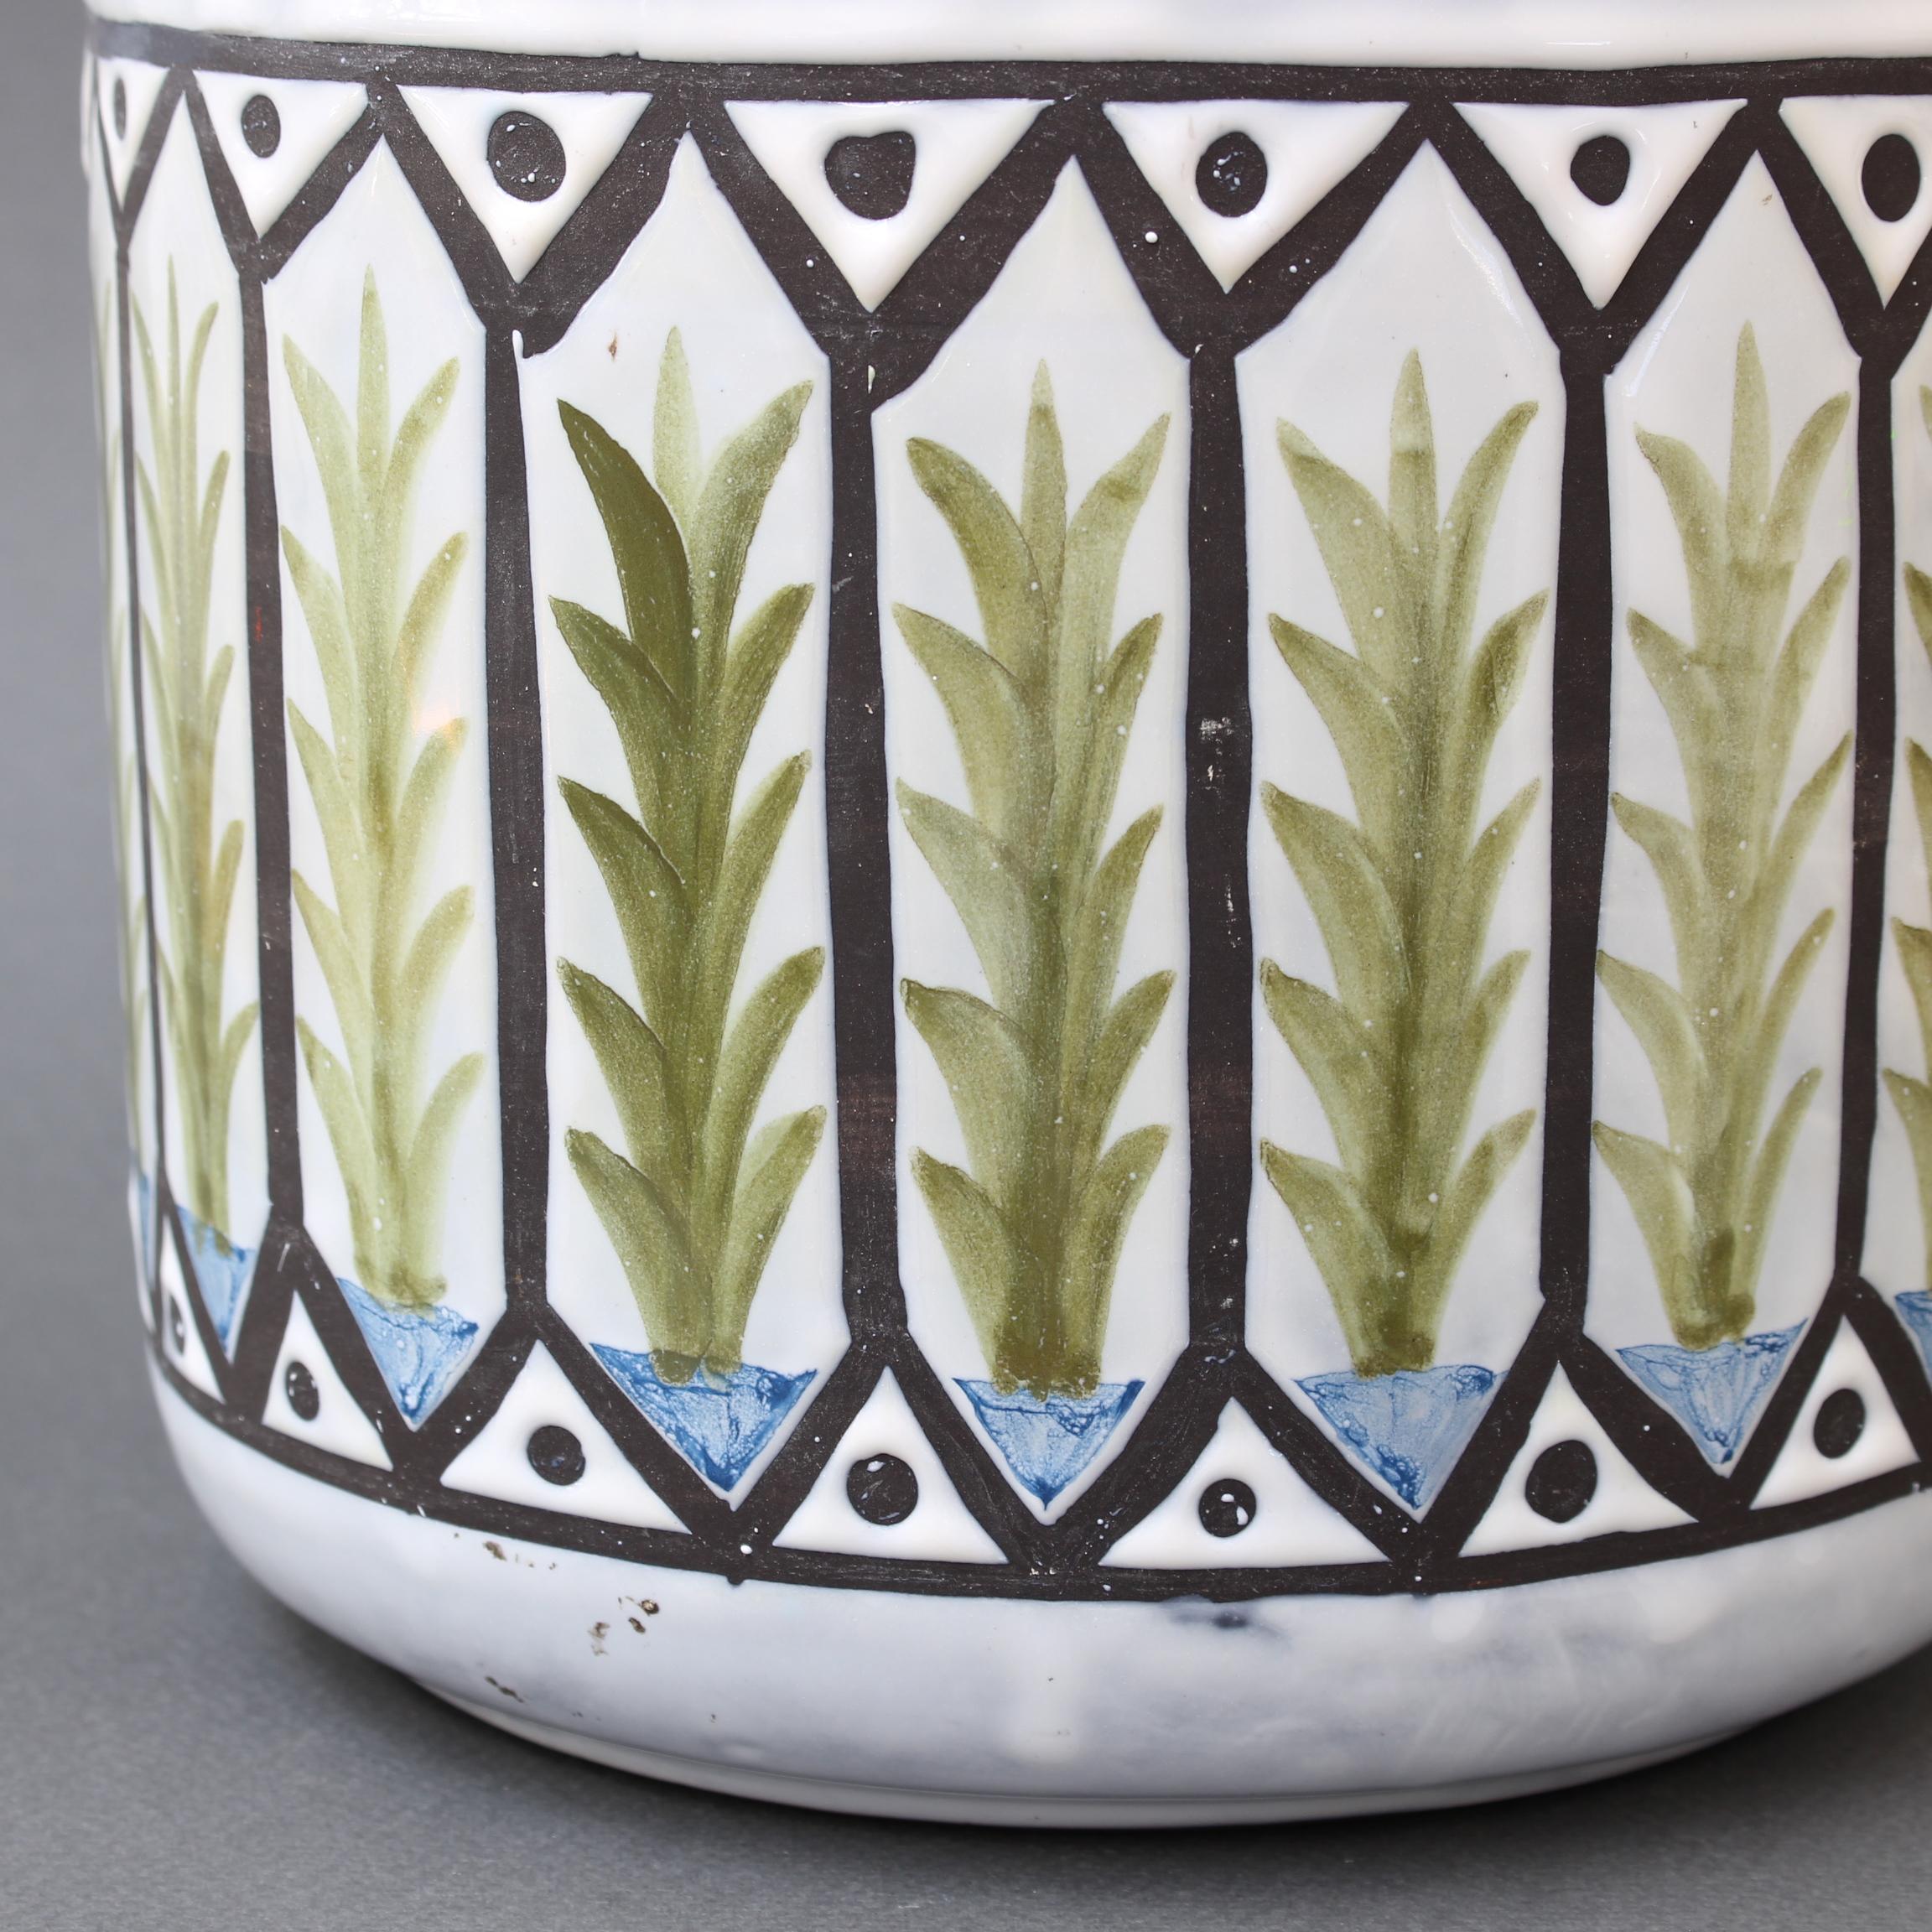 Vintage French Ceramic Cachepot by Roger Capron, 'circa 1970s' For Sale 5